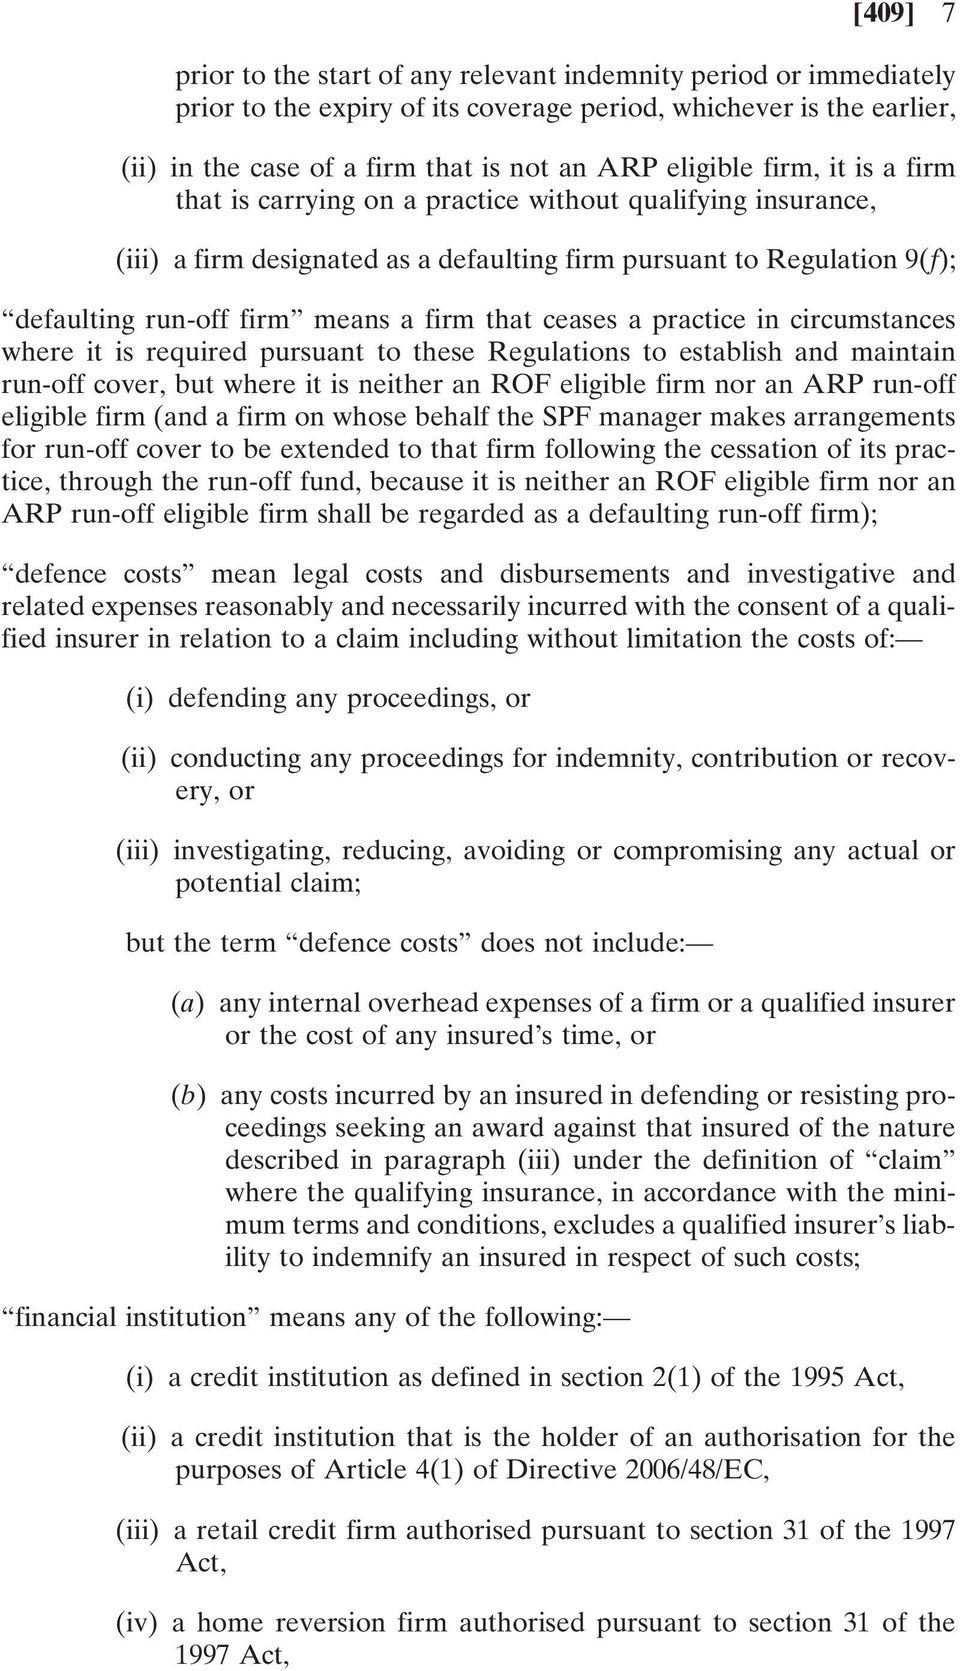 ceases a practice in circumstances where it is required pursuant to these Regulations to establish and maintain run-off cover, but where it is neither an ROF eligible firm nor an ARP run-off eligible